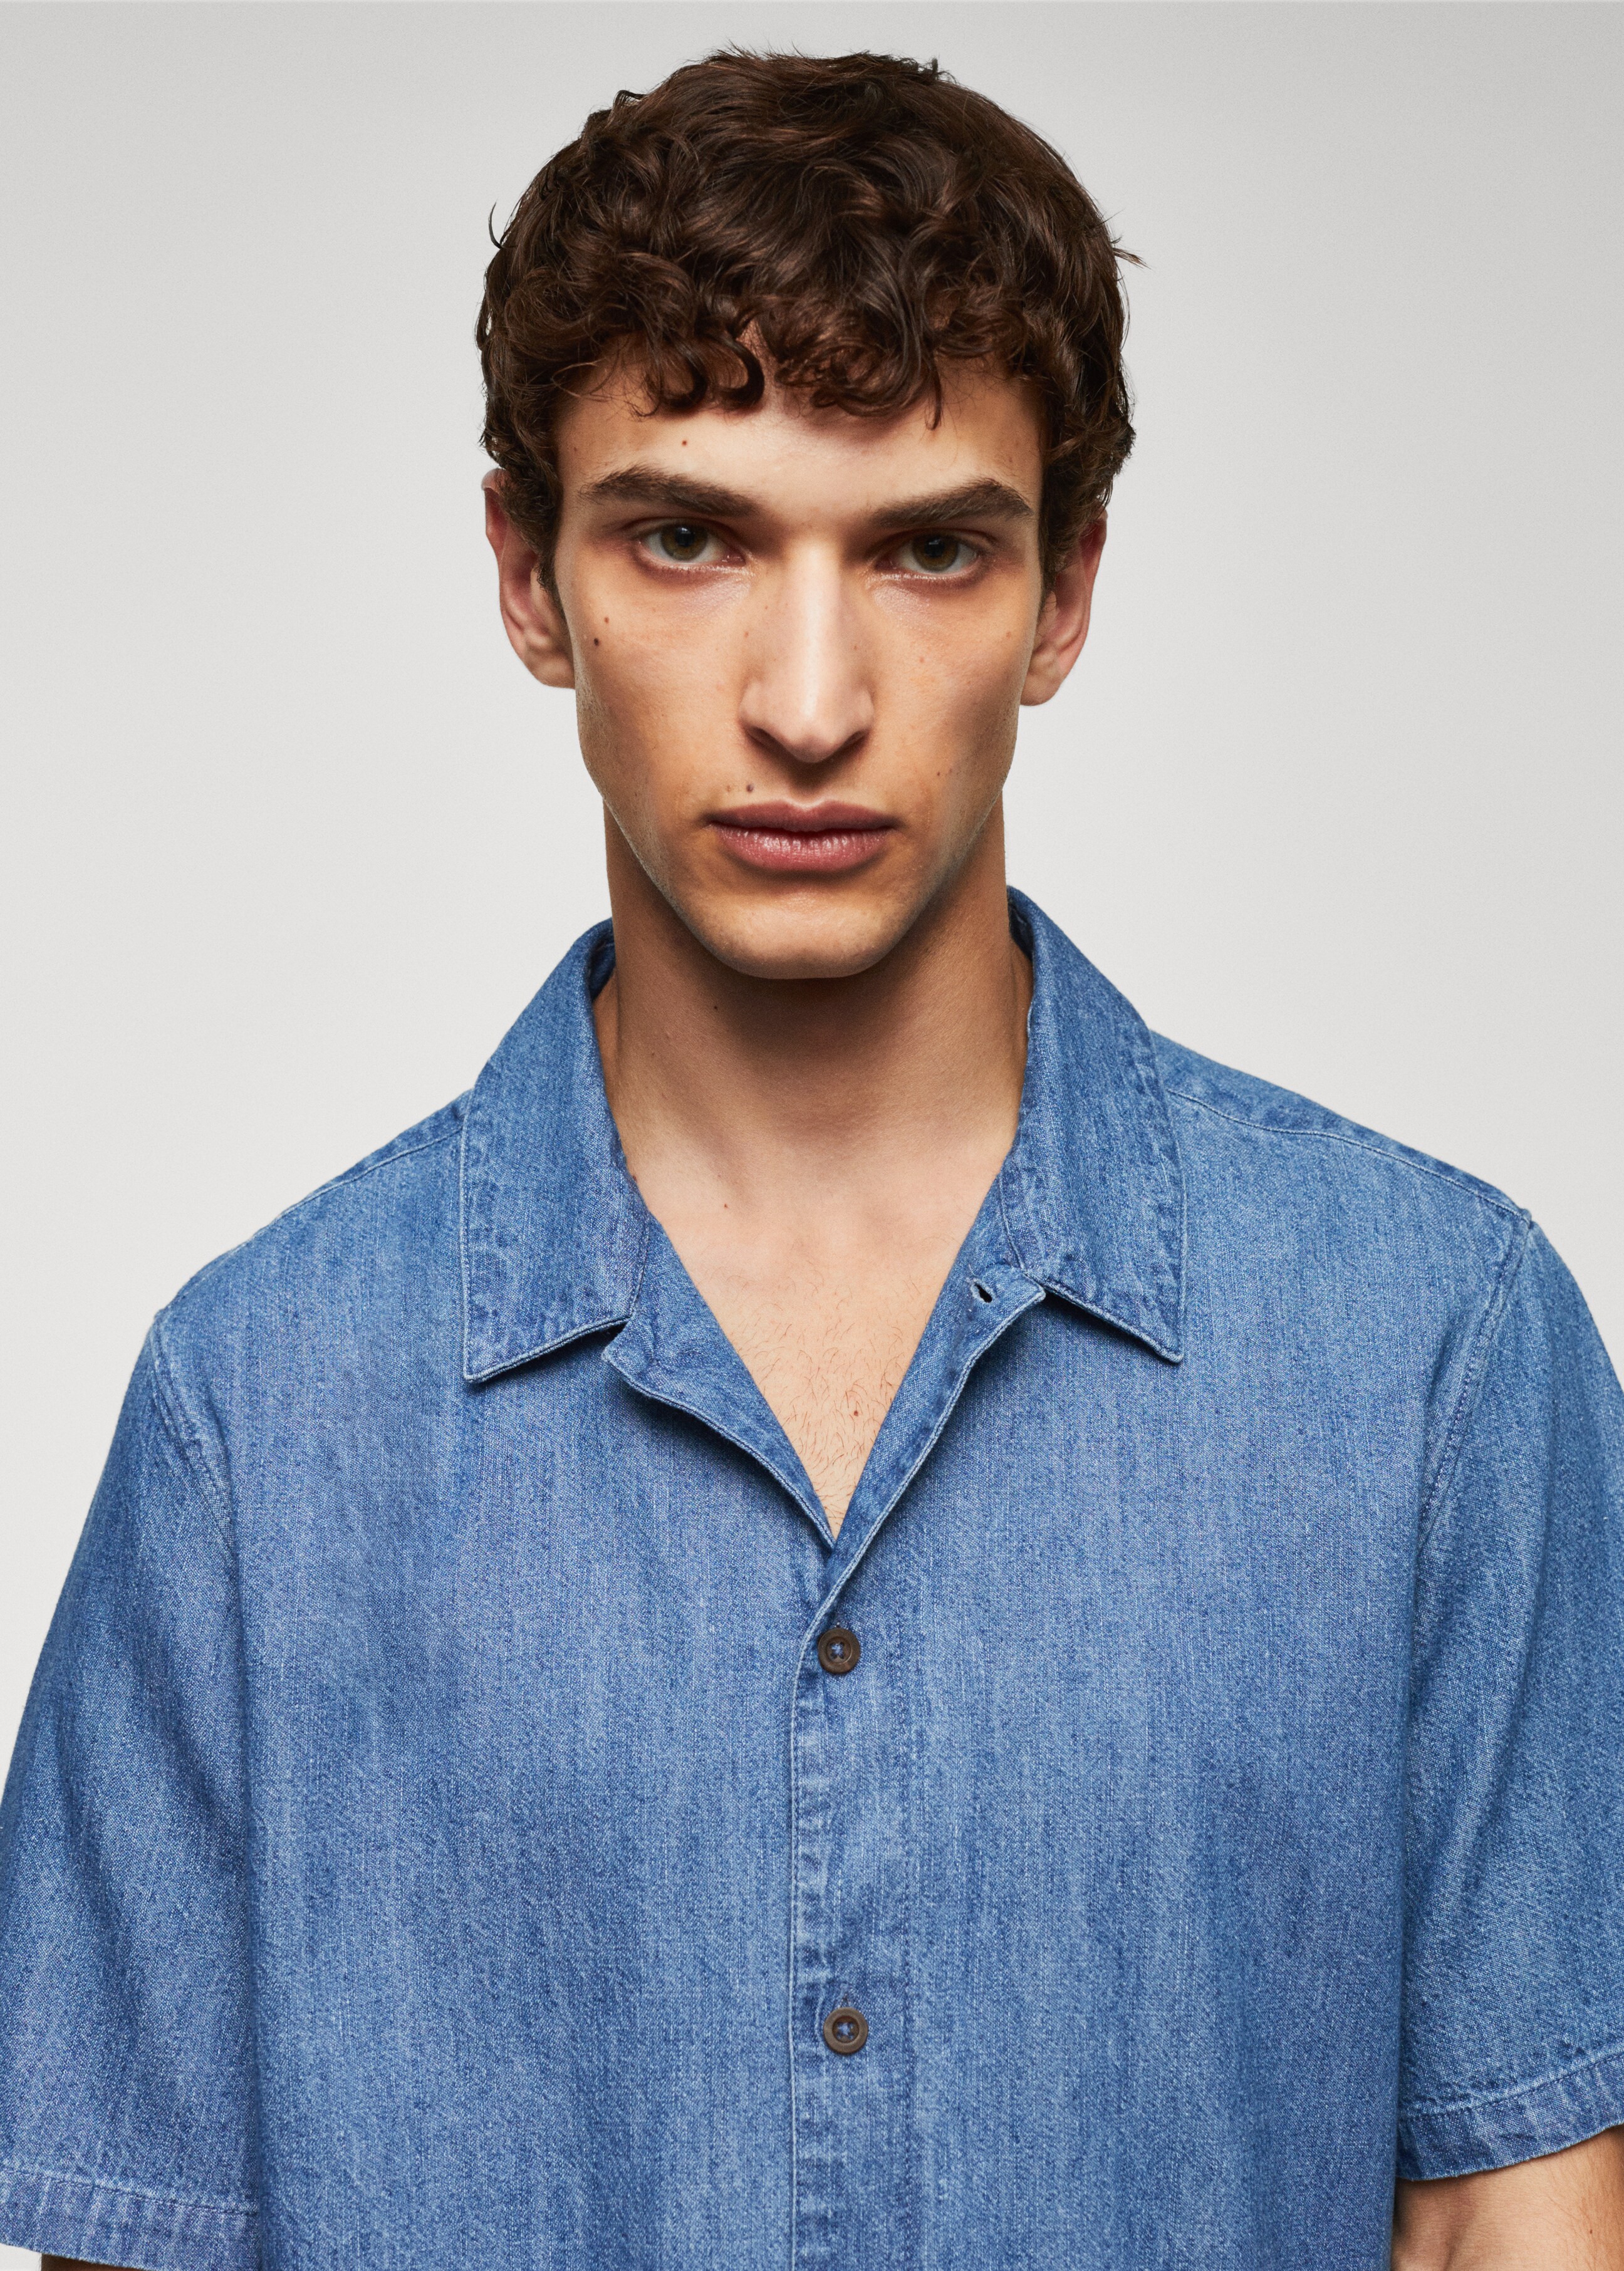 100% cotton chambray shirt - Details of the article 1